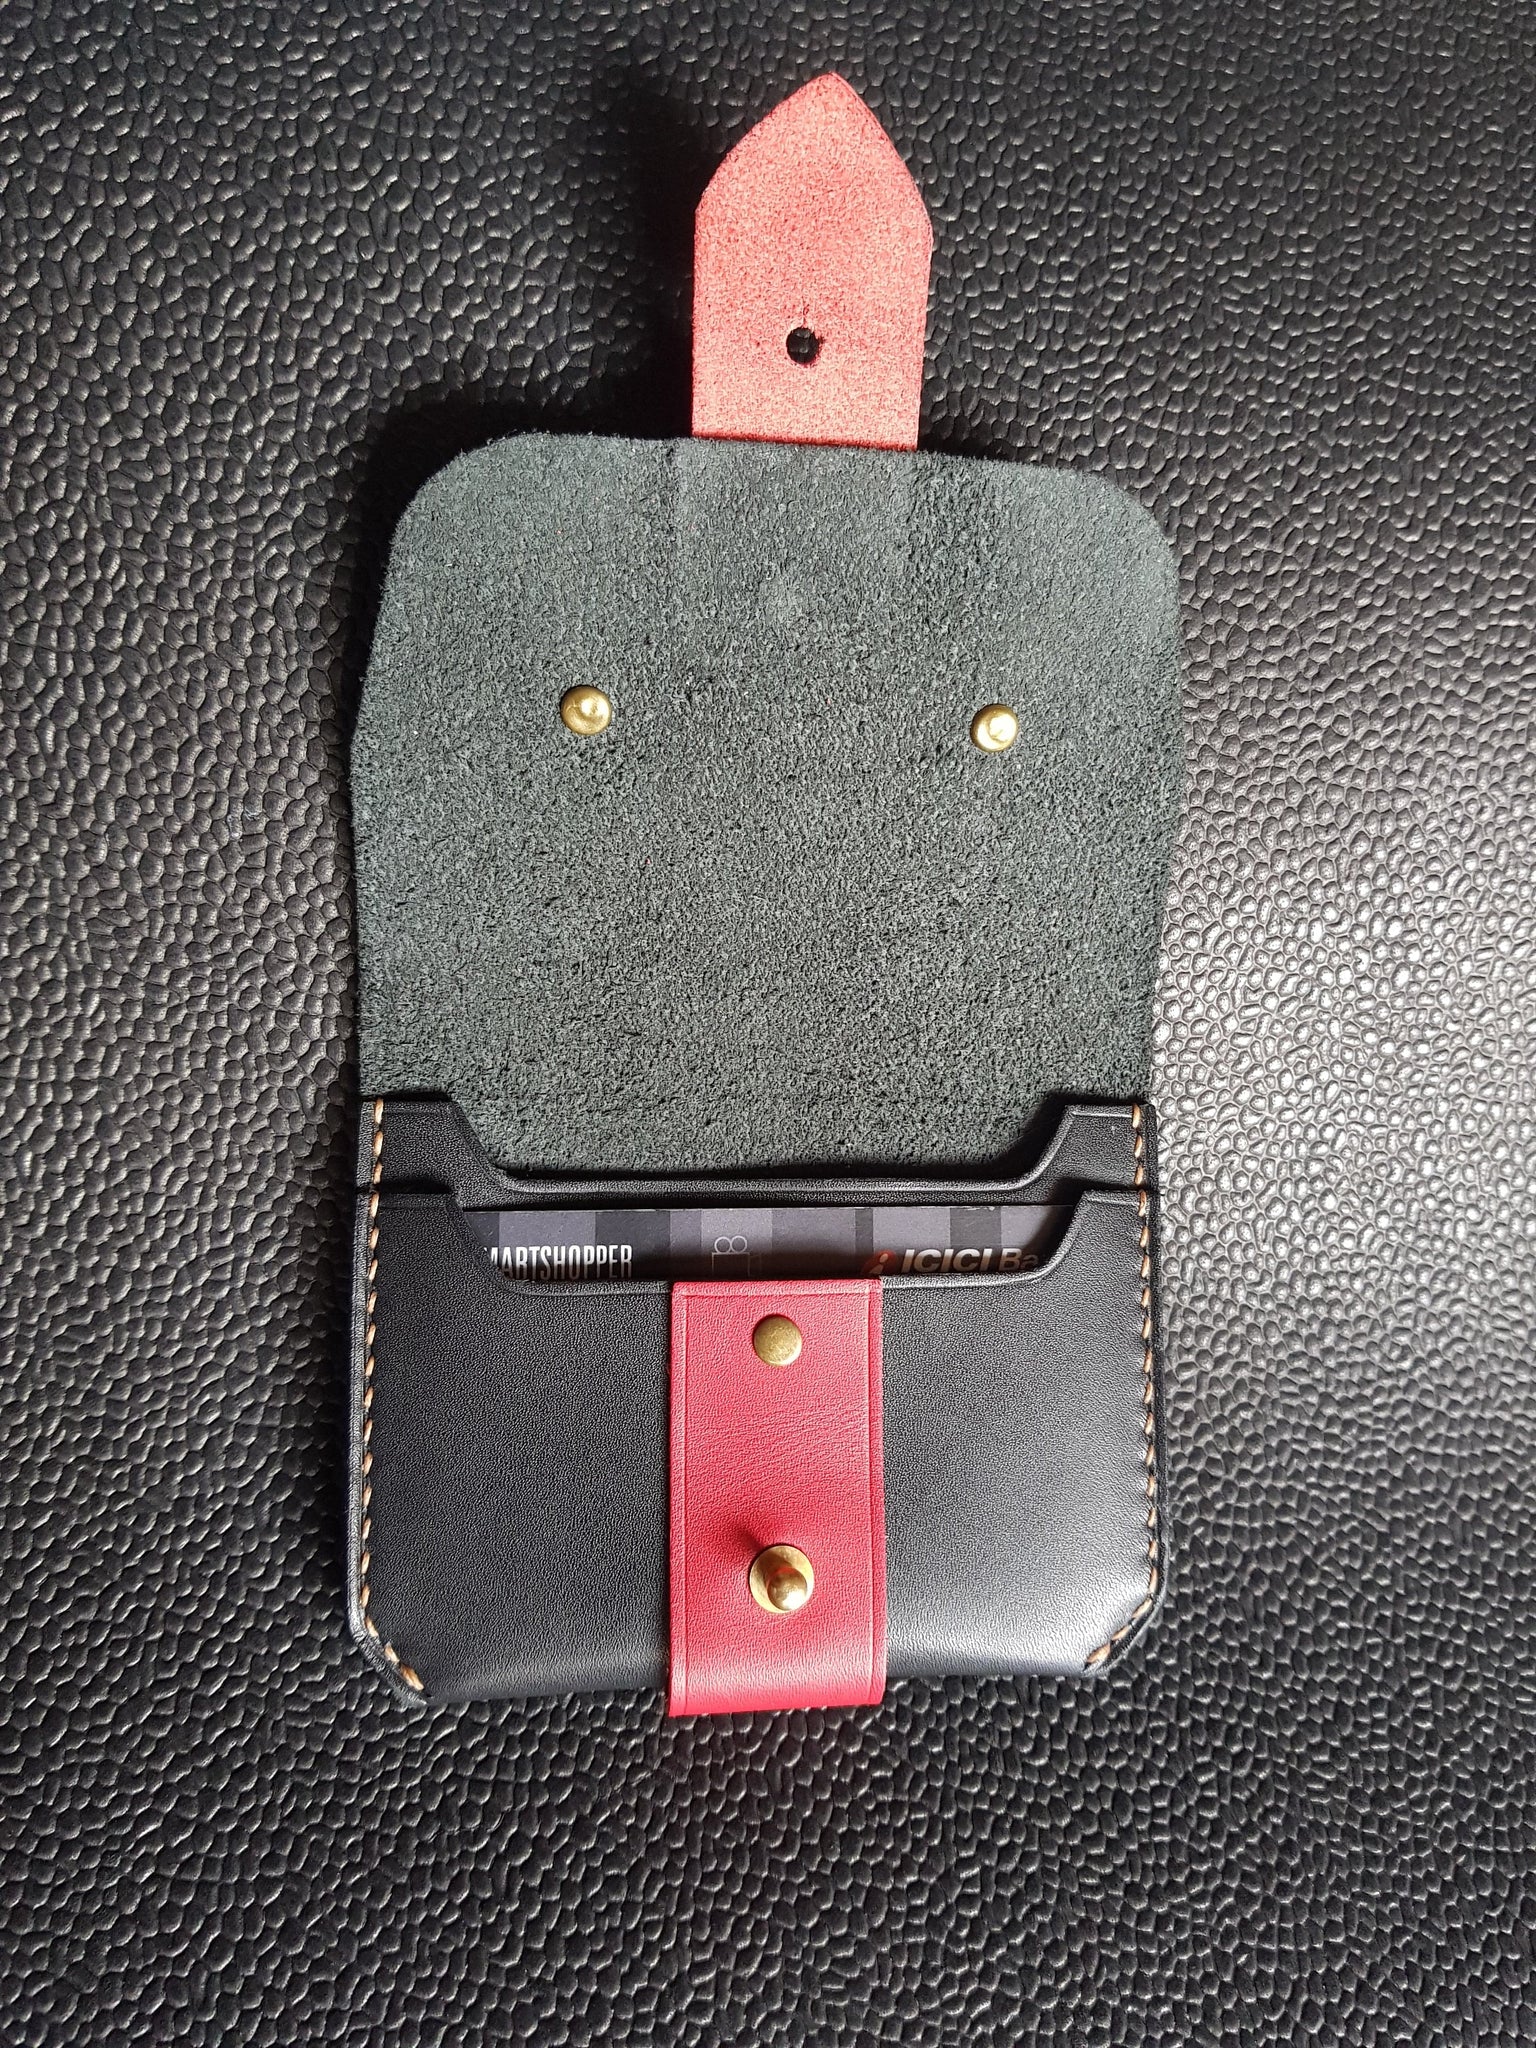 Load image into Gallery viewer, Strap wallet - Indianleathercraft